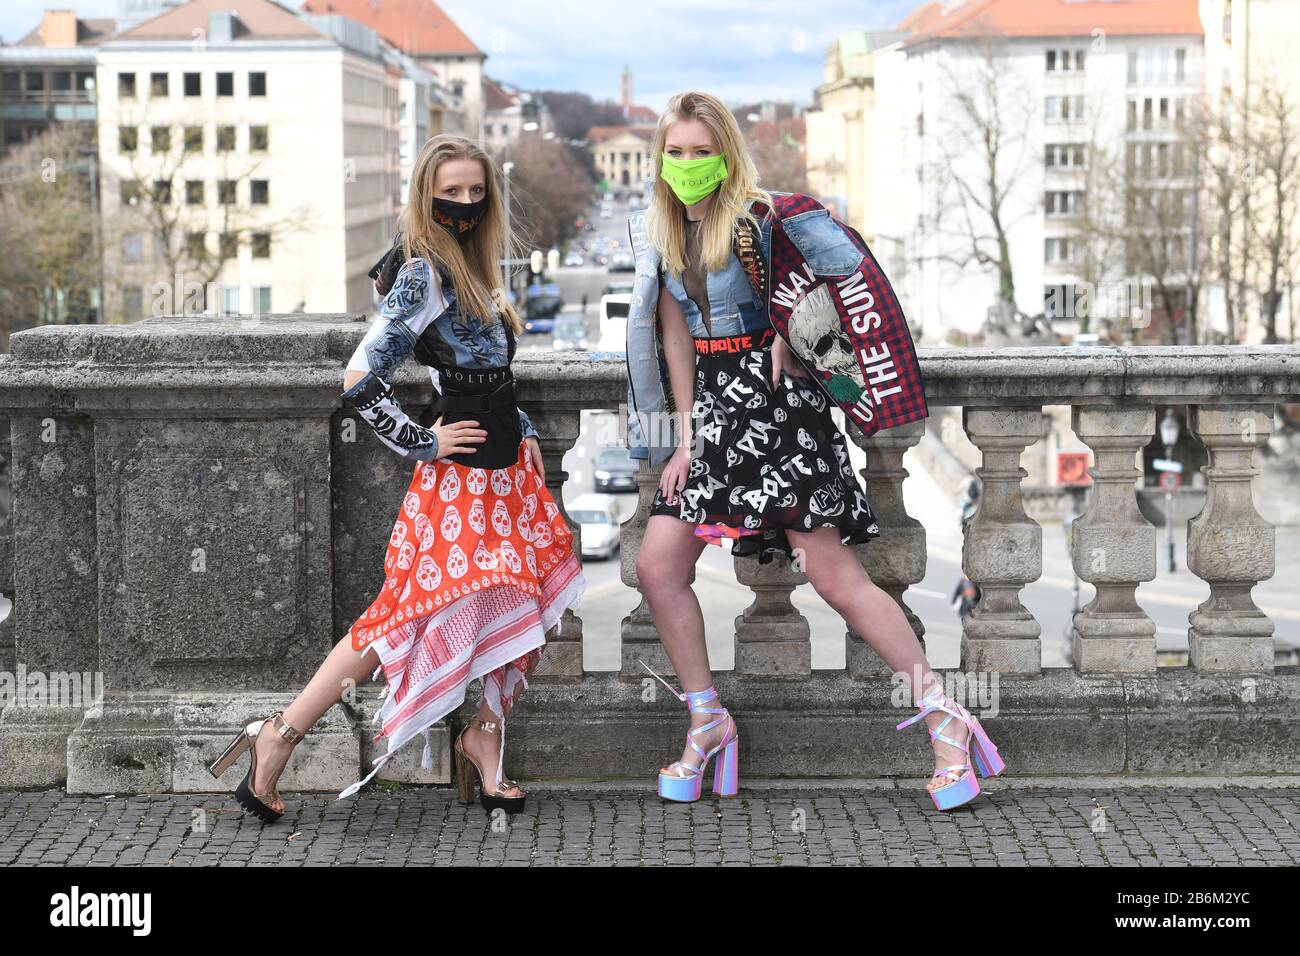 Munich, Germany. 11th Mar, 2020. dpa-exclusive: The models Verena Schmidl (l) and Klarika Koly present themselves with the colourful, glittering and shrill fashion of fashion designer Pia Bolte at the Friedensengel with colourful mouthguards. The mouthguard is not only meant to protect against viruses, but also to underline the extravagance of Bolte's fashion line. Credit: Felix Hörhager/dpa/Alamy Live News Stock Photo